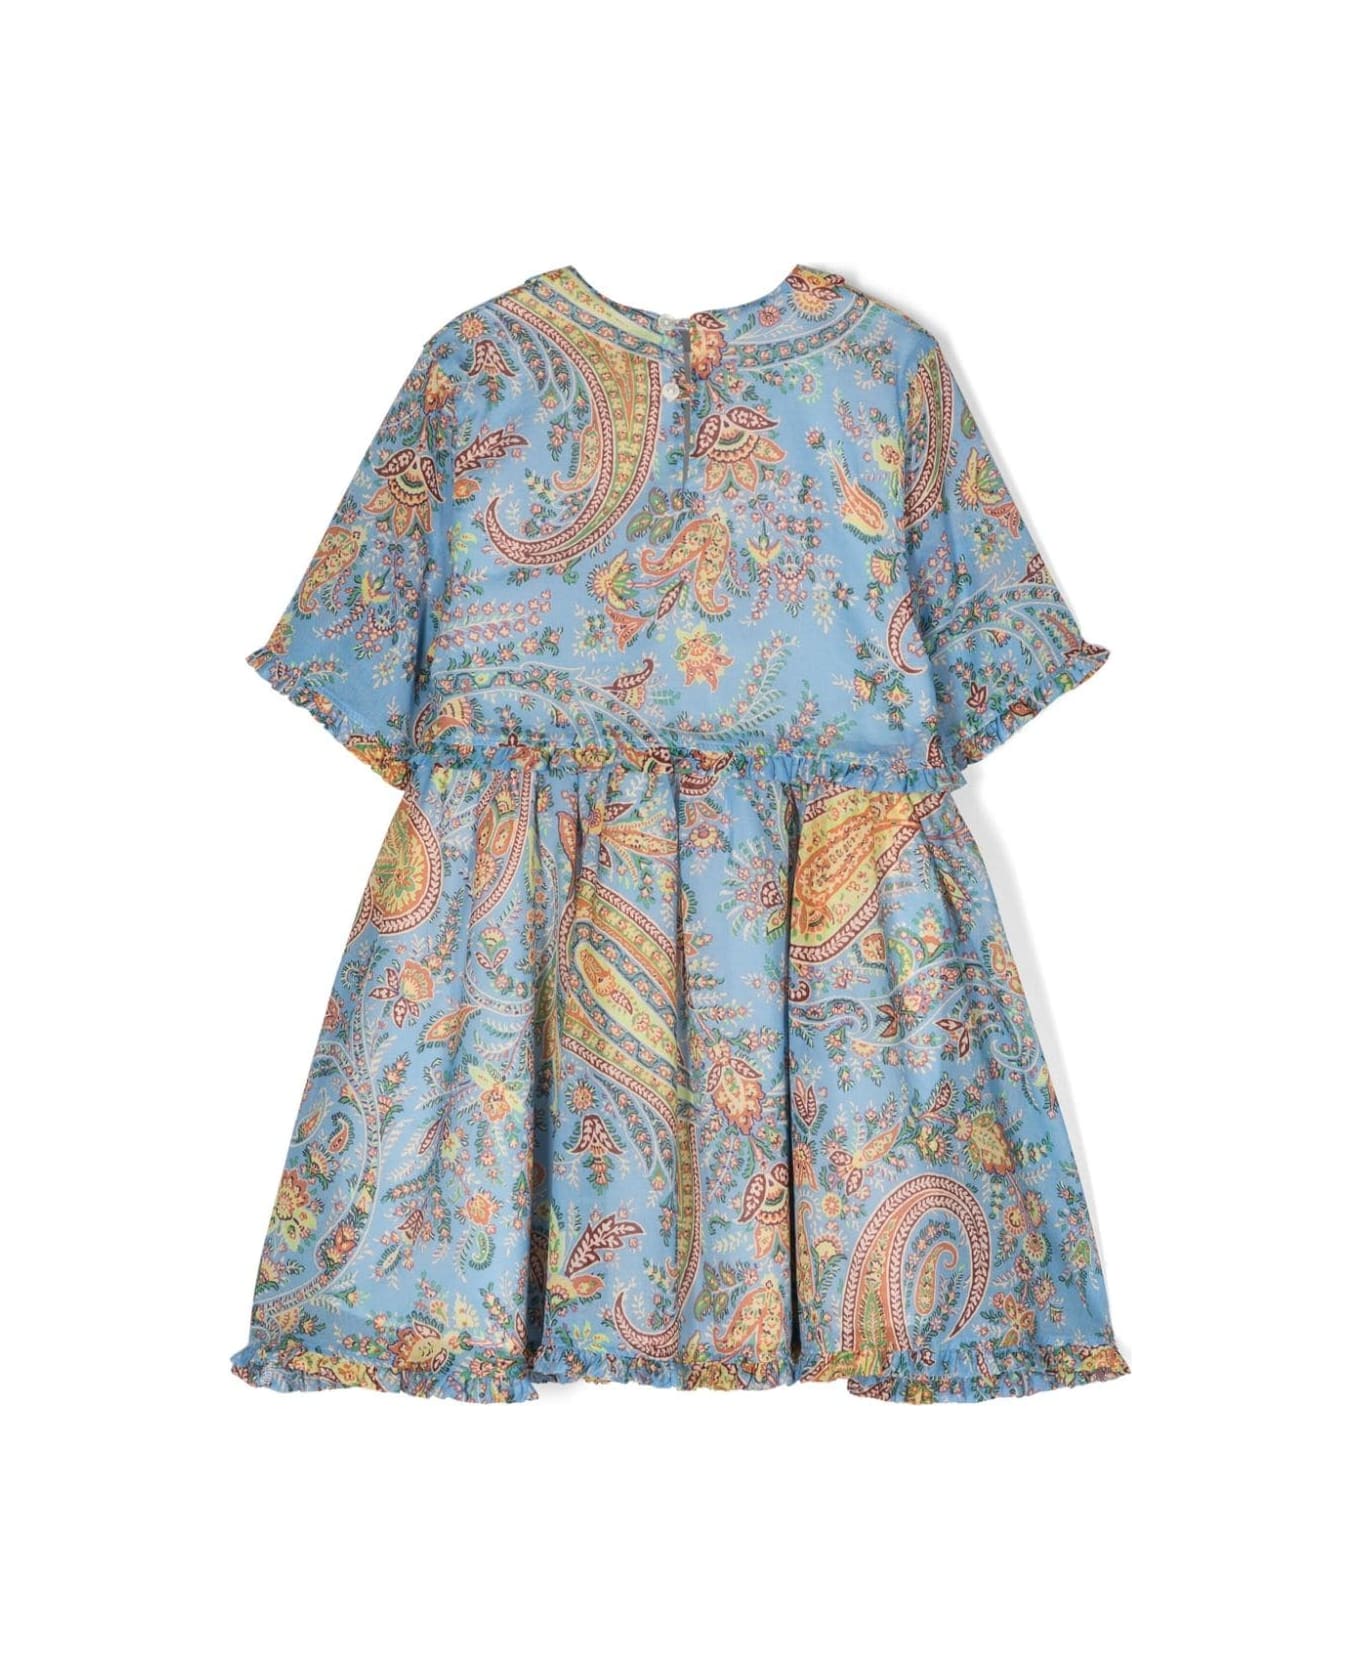 Etro Light Blue Dress With Ruffles And Paisley Motif - Blue